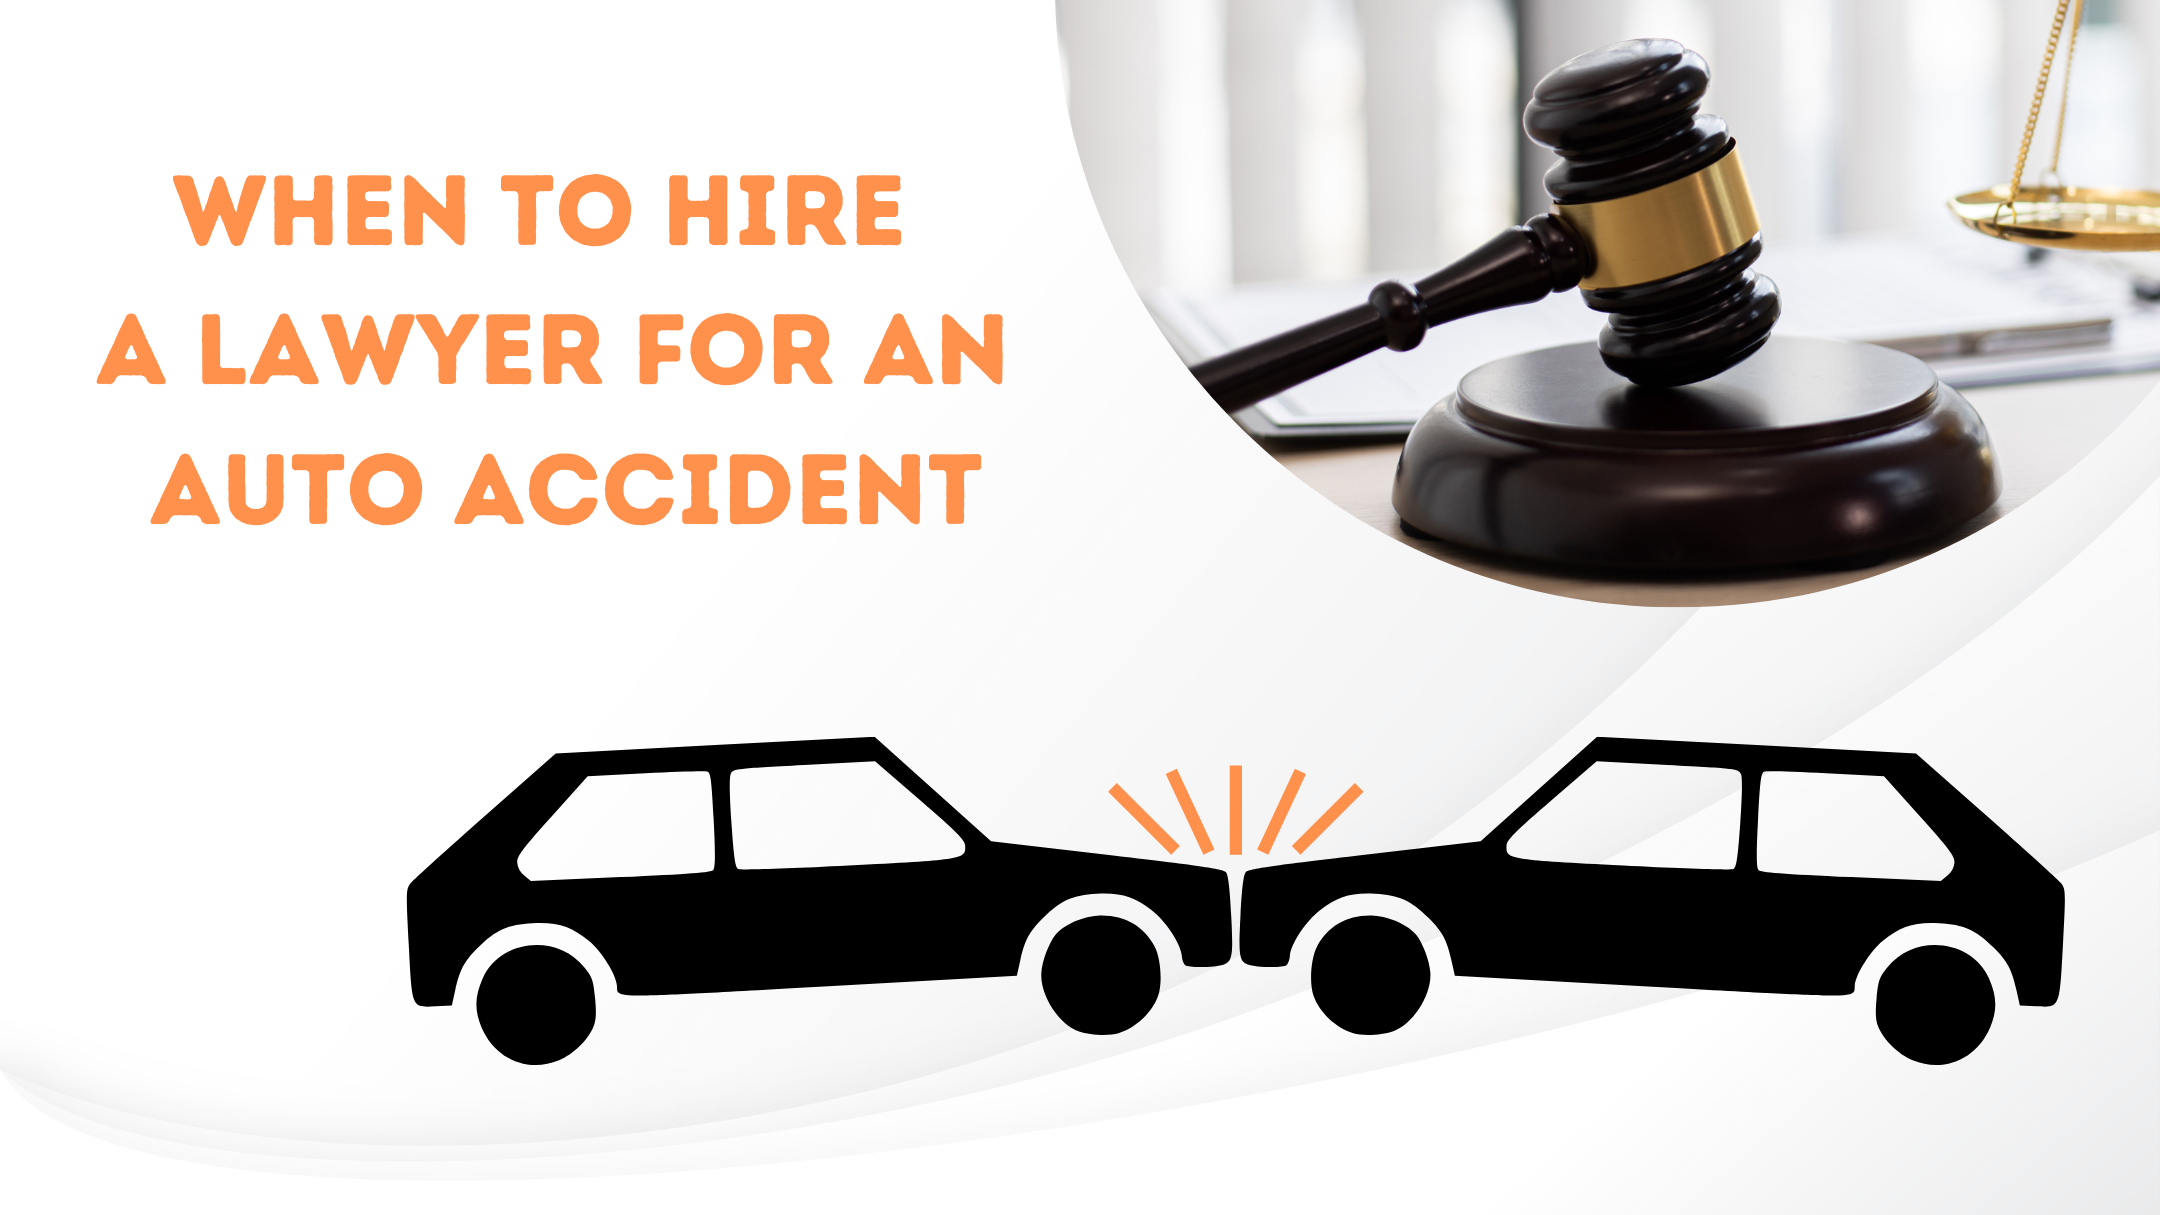 When to Hire a Lawyer for an Auto Accident